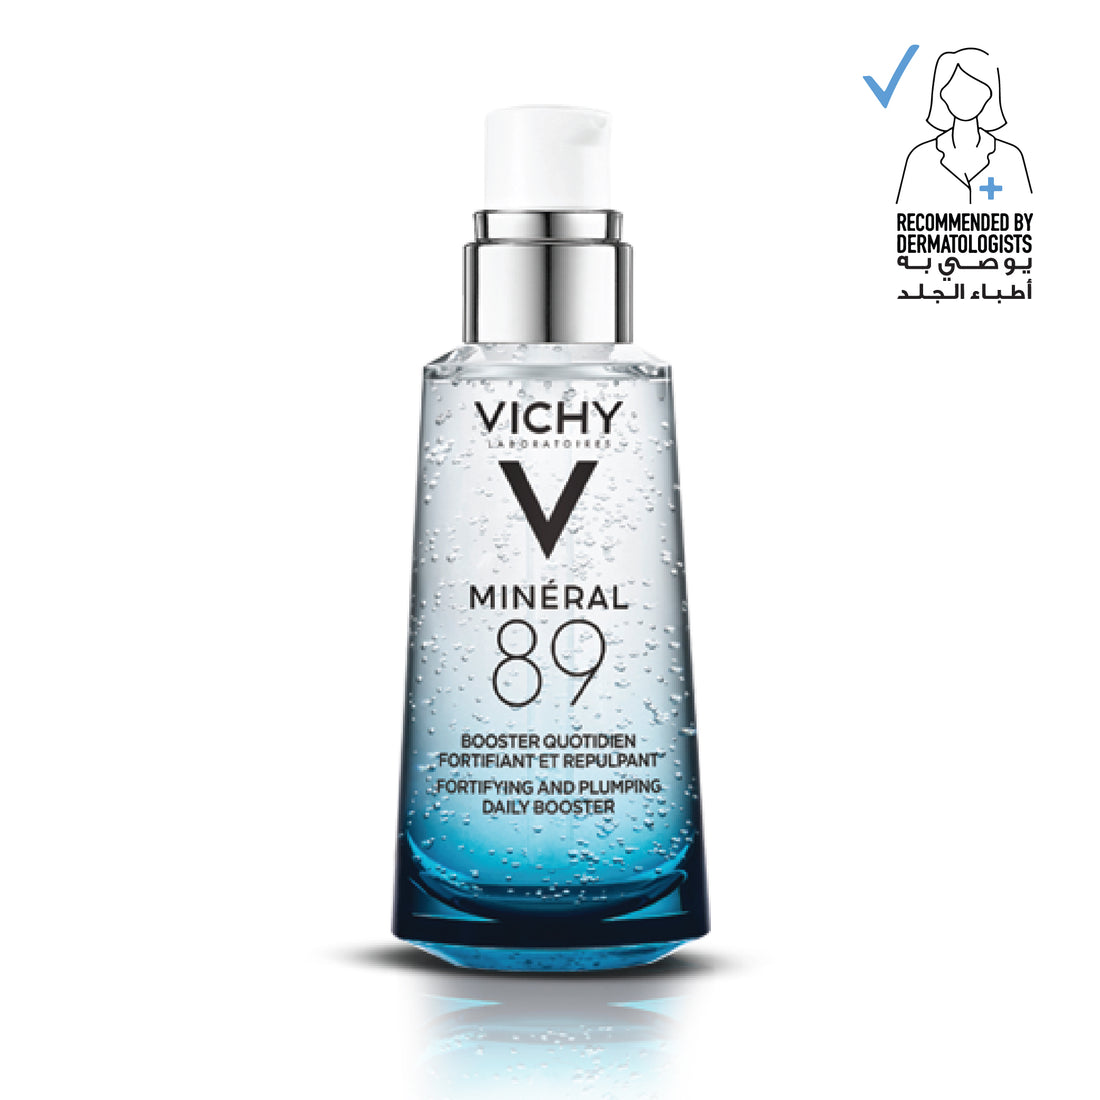 Vichy Mineral 89 Hyaluronic Acid Serum for All Skin Types 50ml